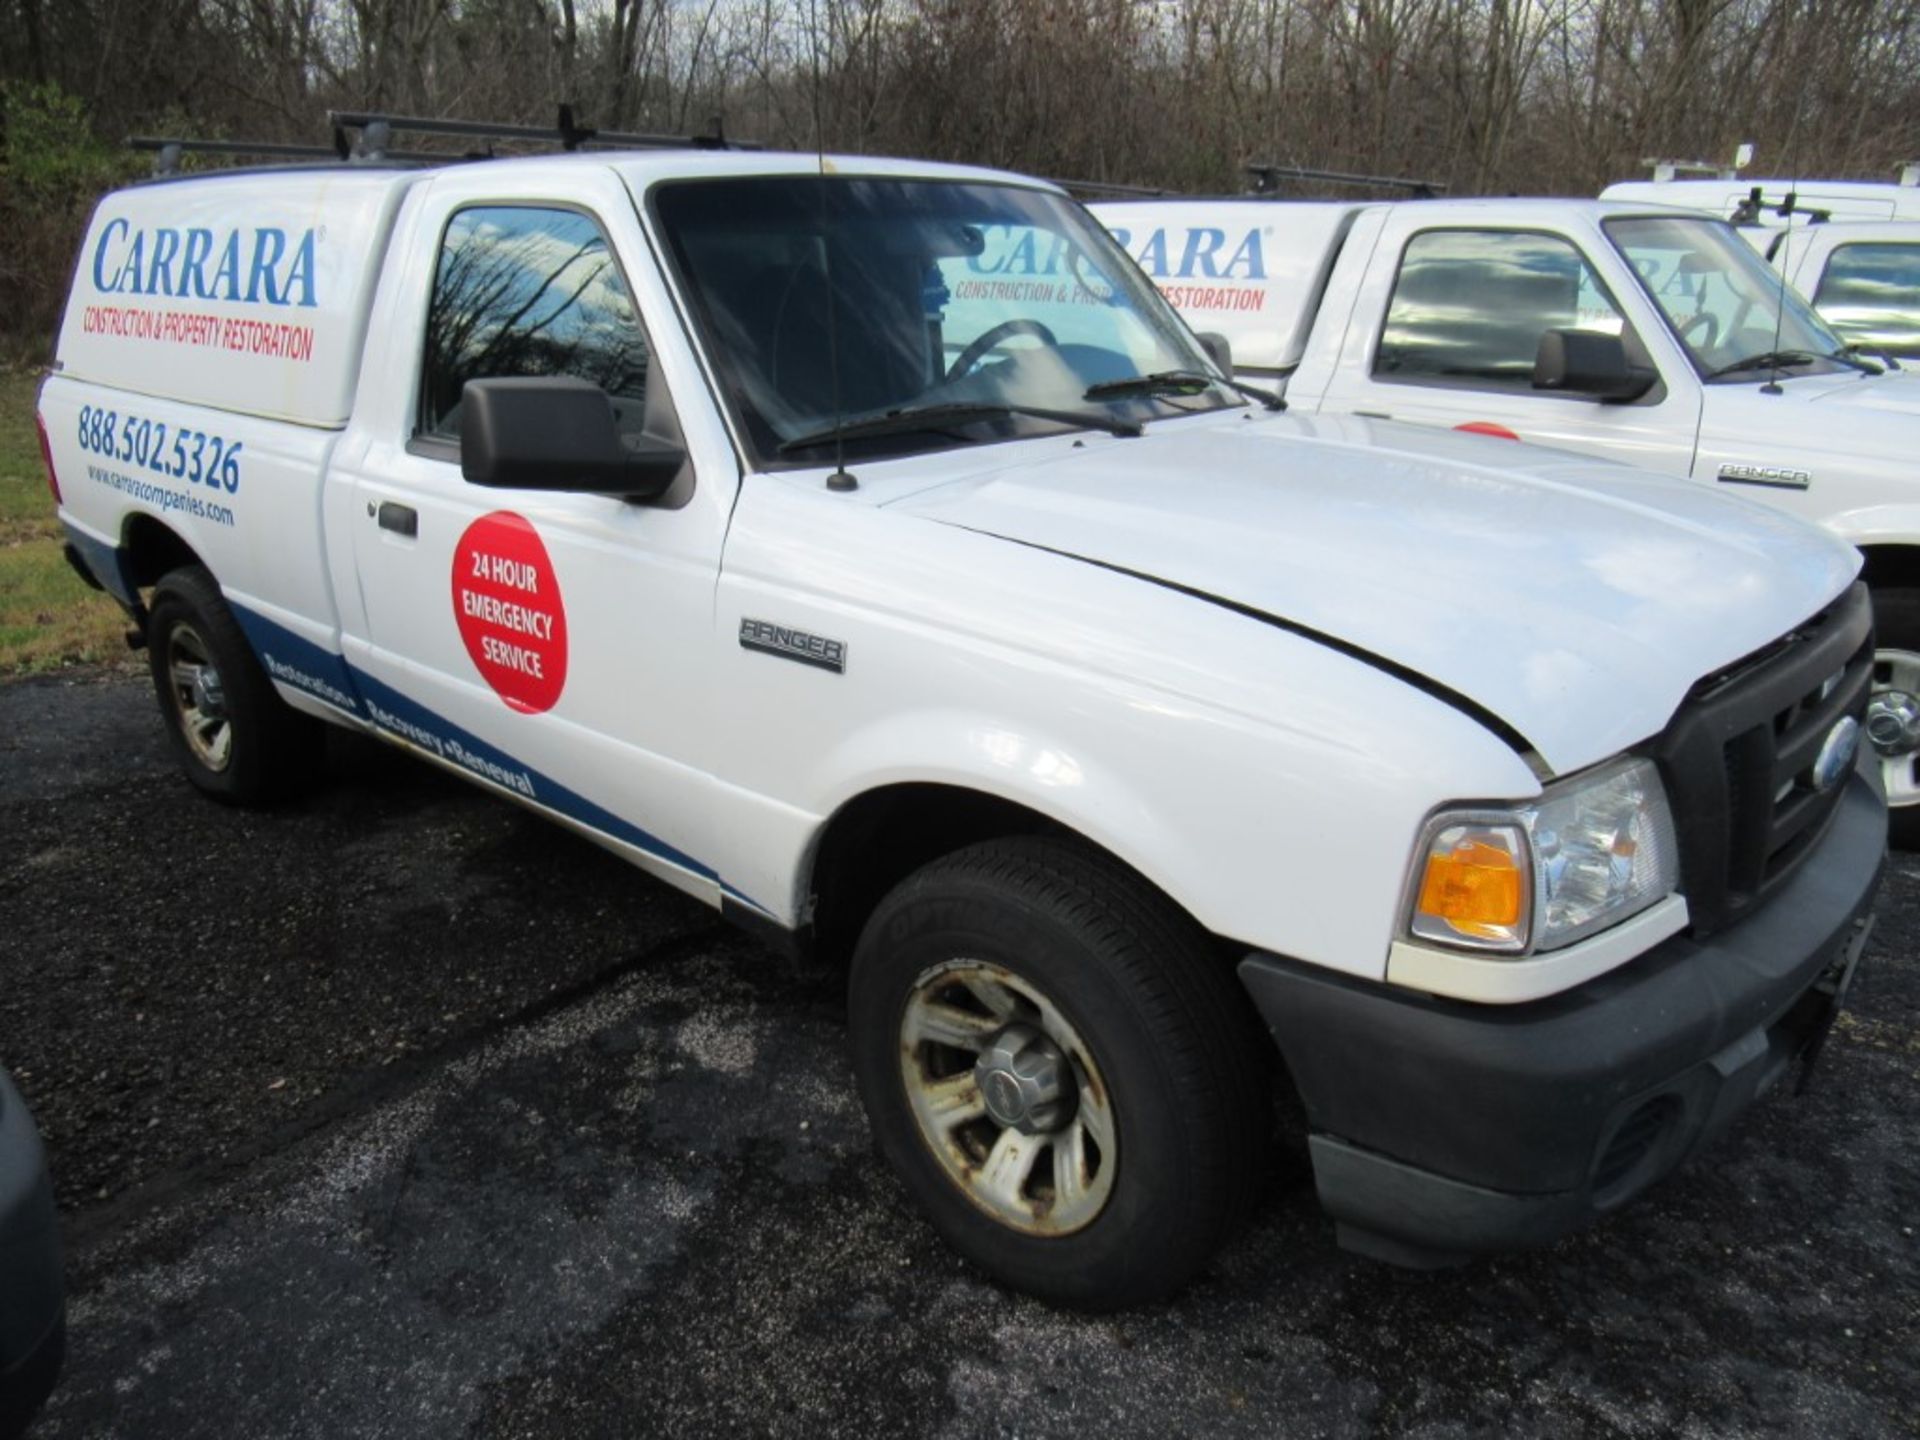 2009 Ford Ranger Pickup, VIN 1FTYR10D39PA15064, Regular Cab, Automatic, AC, AM/FM, Cap ,Started with - Image 4 of 22